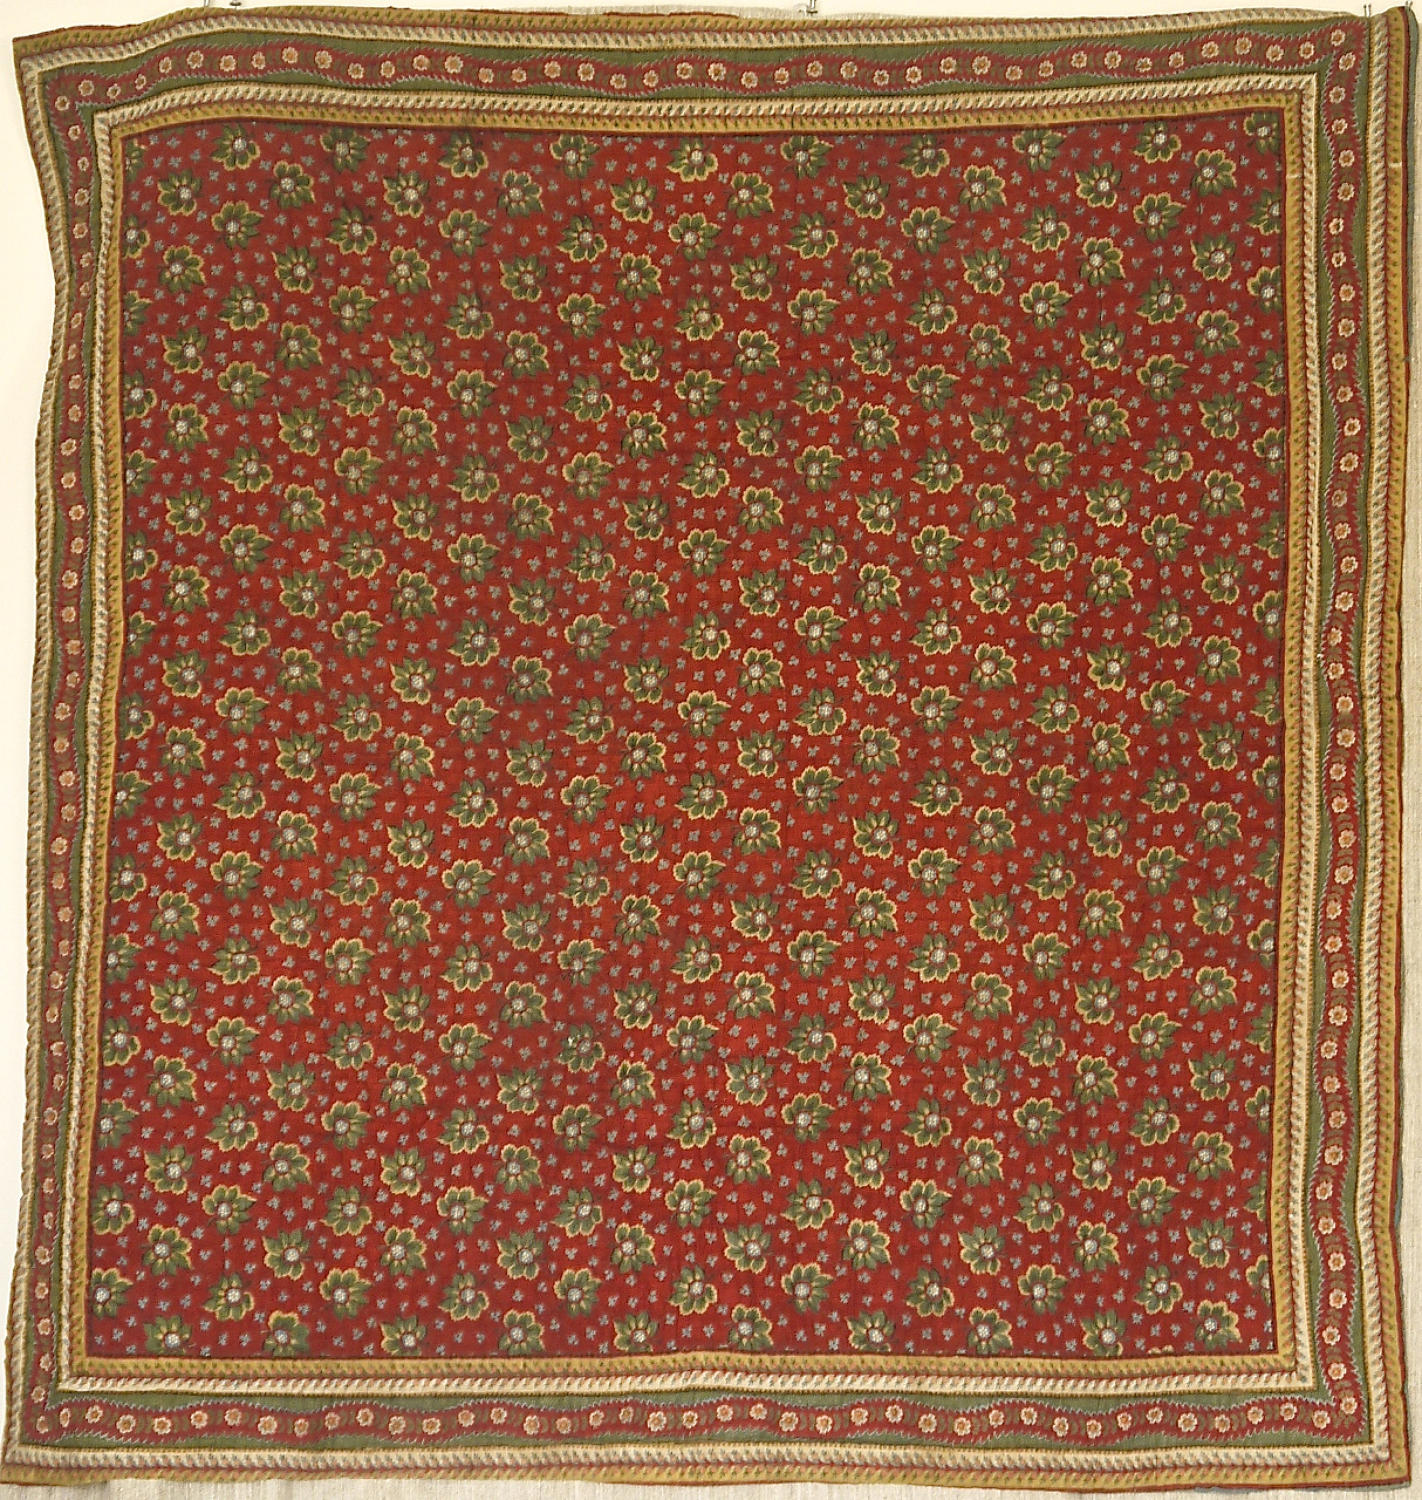 Small Green and Red Cotton Quilt French 19th Century